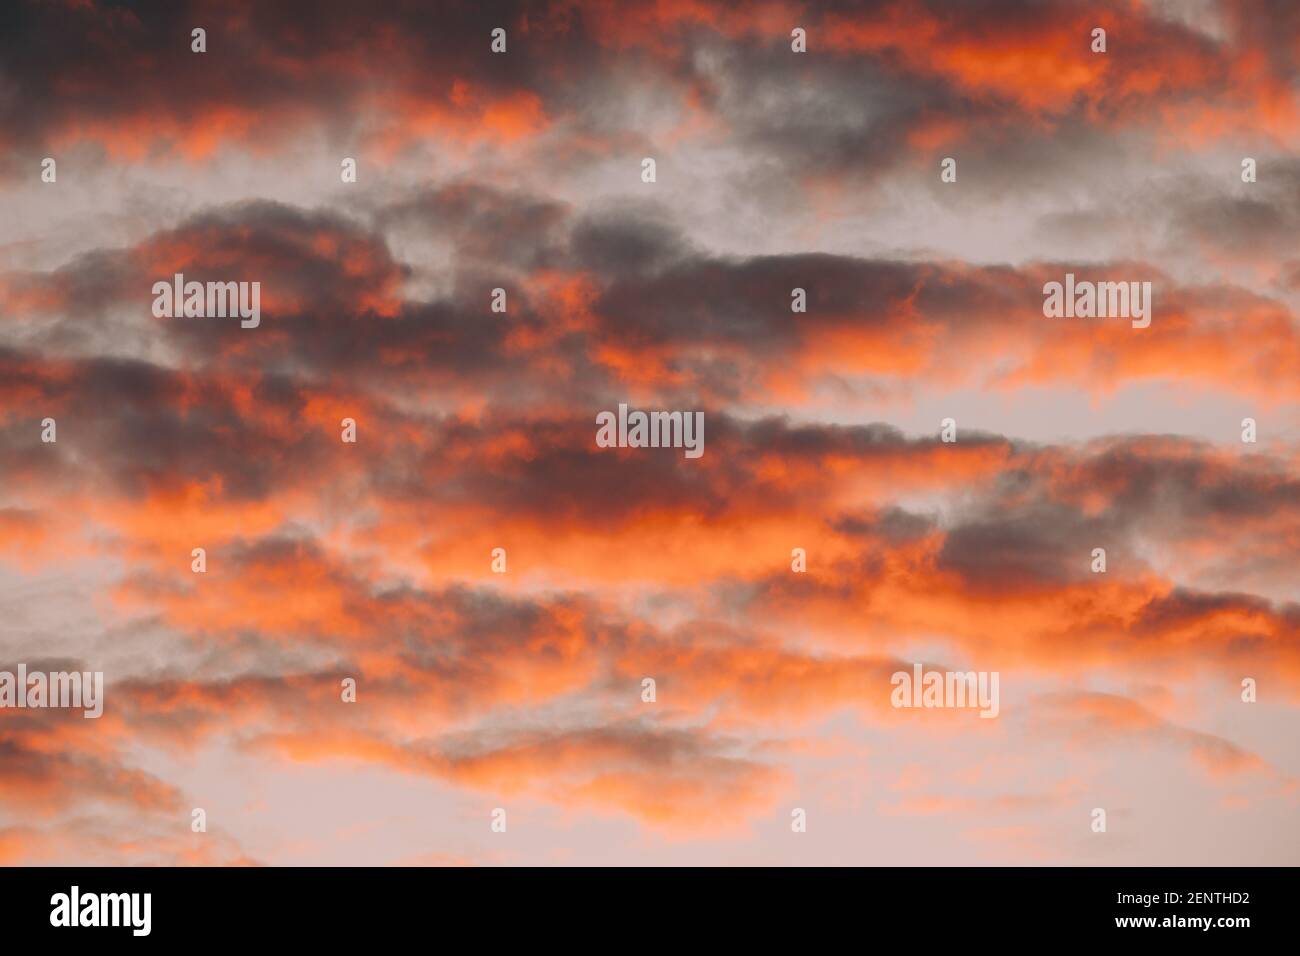 Sunrise Bright Dramatic Sky. Scenic Colorful Sky At Dawn. Sunset Sky Natural Abstract Background In Pink Red Orange Colors. Stock Photo